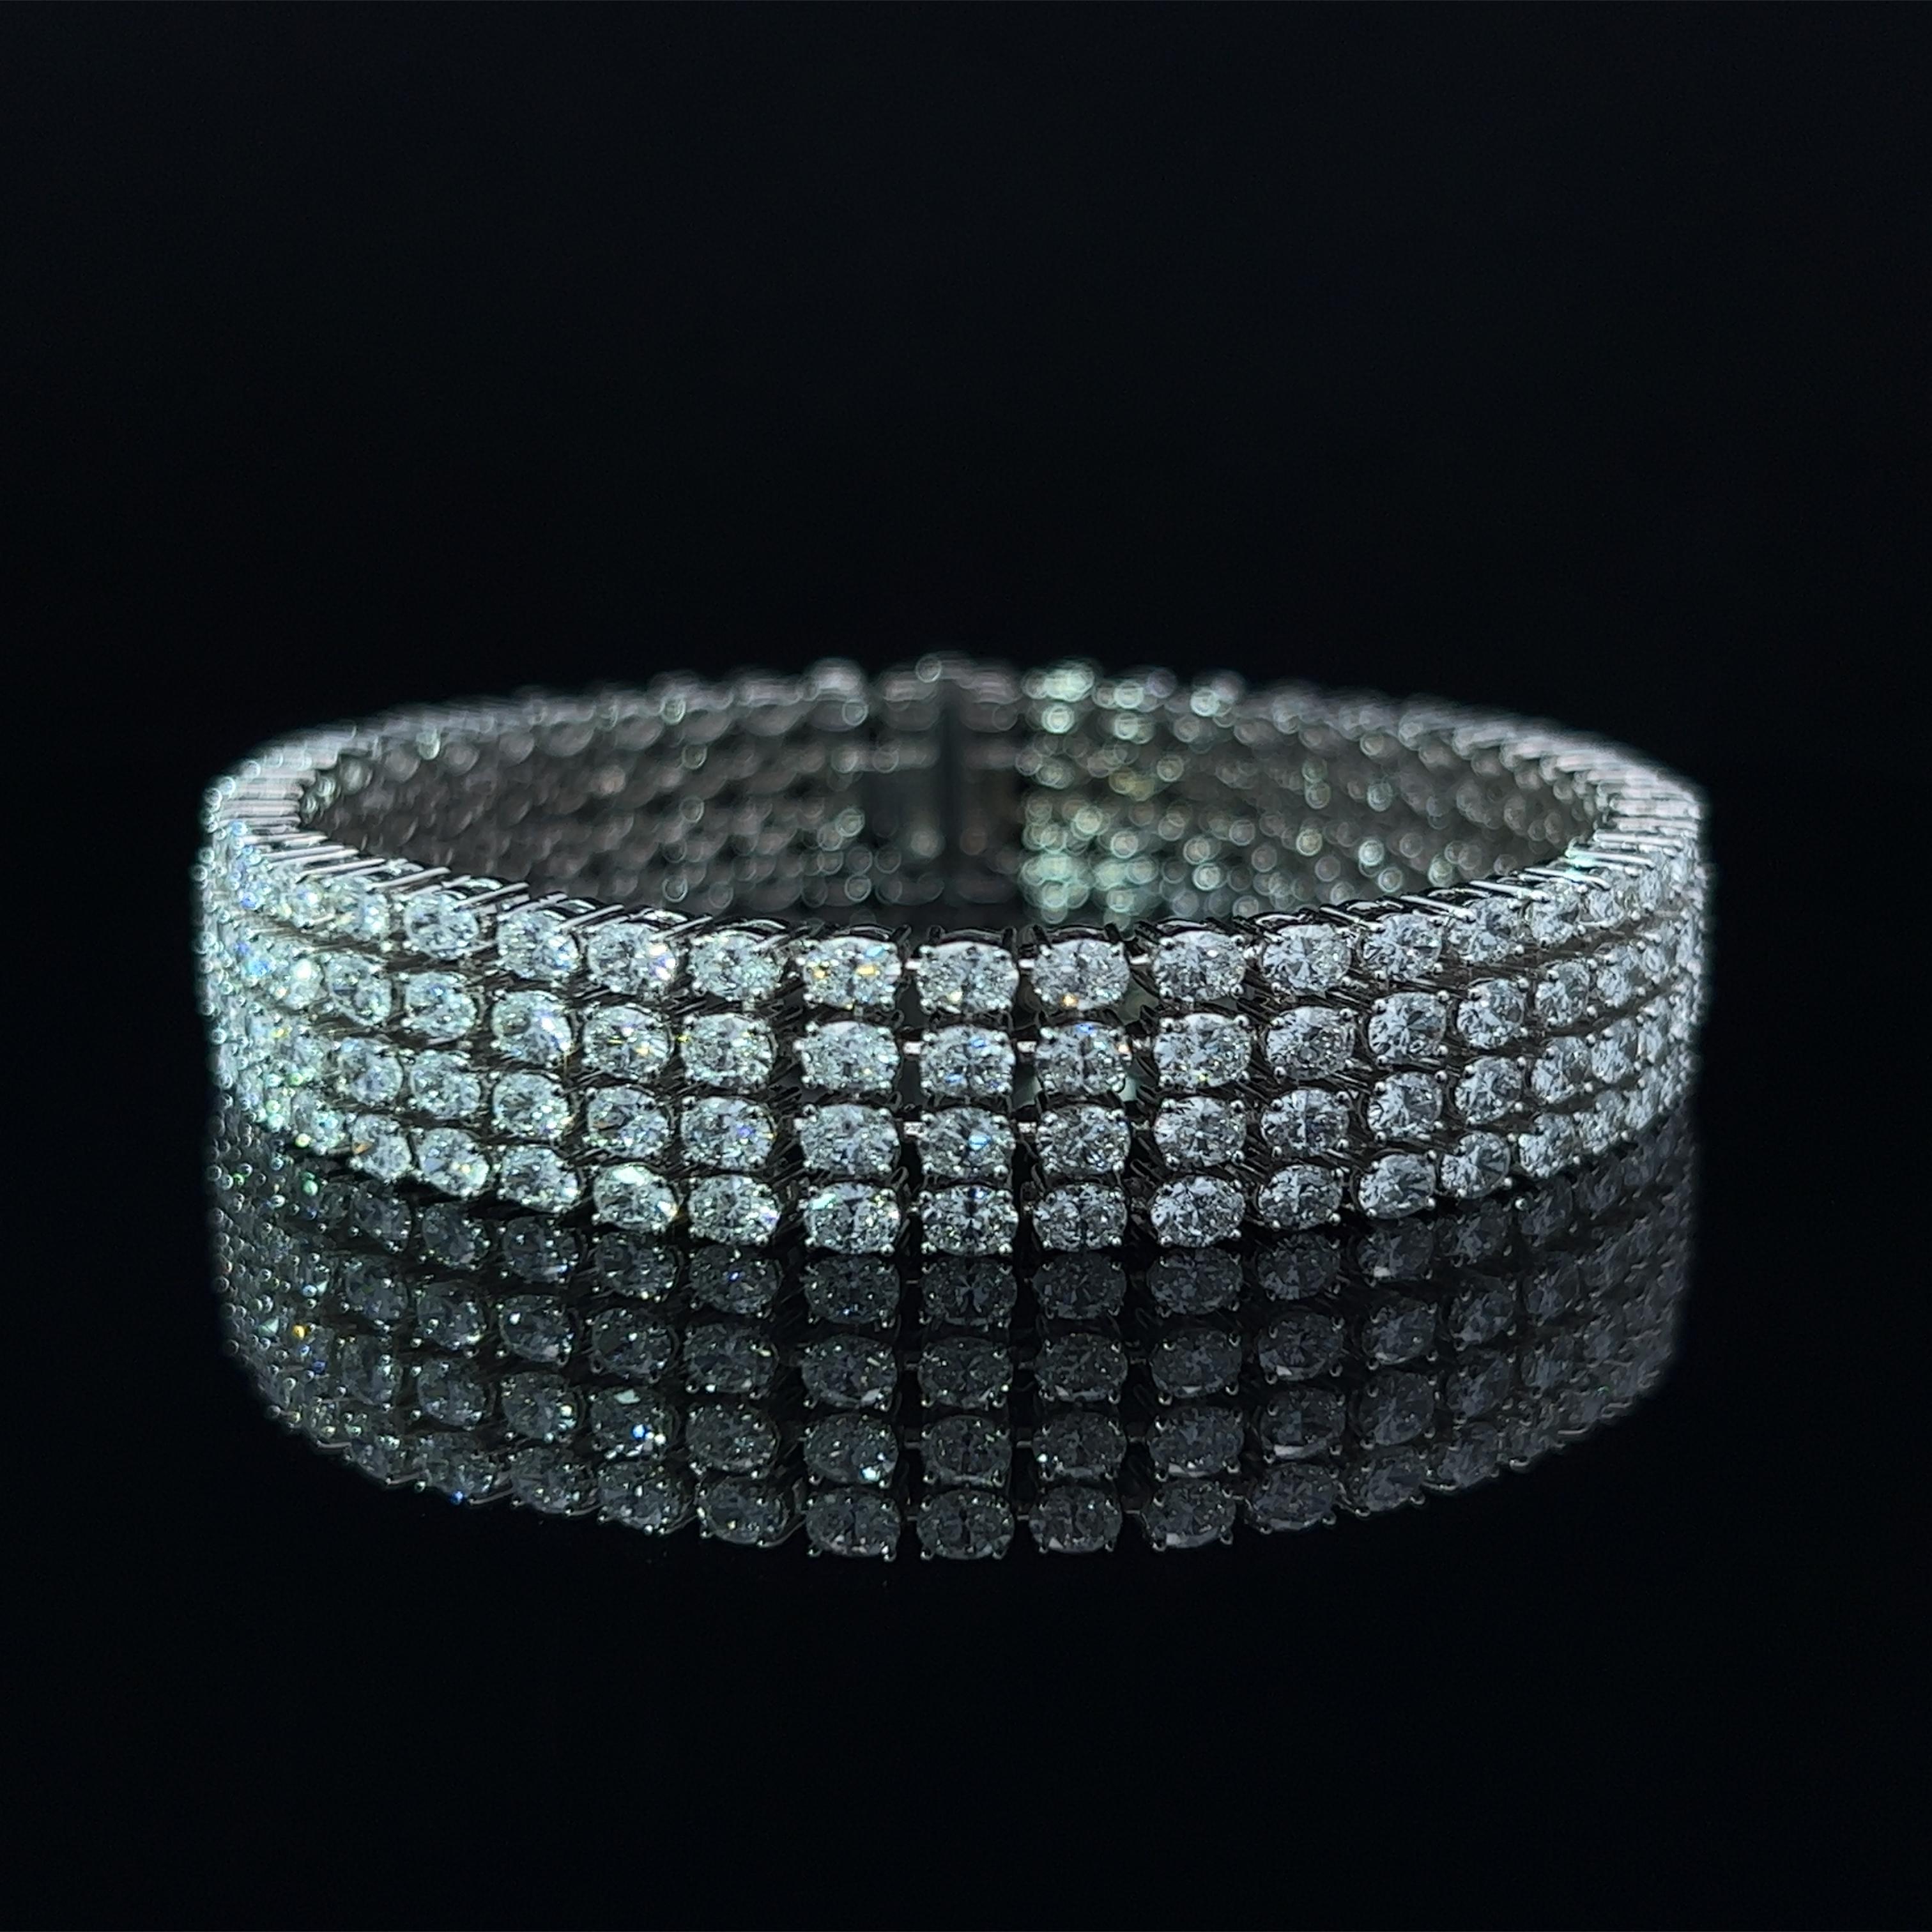 Diamond Shape: Oval Cut 
Total Diamond Weight: 15.36ct
Individual Diamond Weight: .10ct
Color/Clarity: EF VVS  
Metal: 18K White Gold  
Metal Weight: 33.6g 

Key Features:

Oval-Cut Diamonds: The centerpiece of this bracelet showcases a dazzling